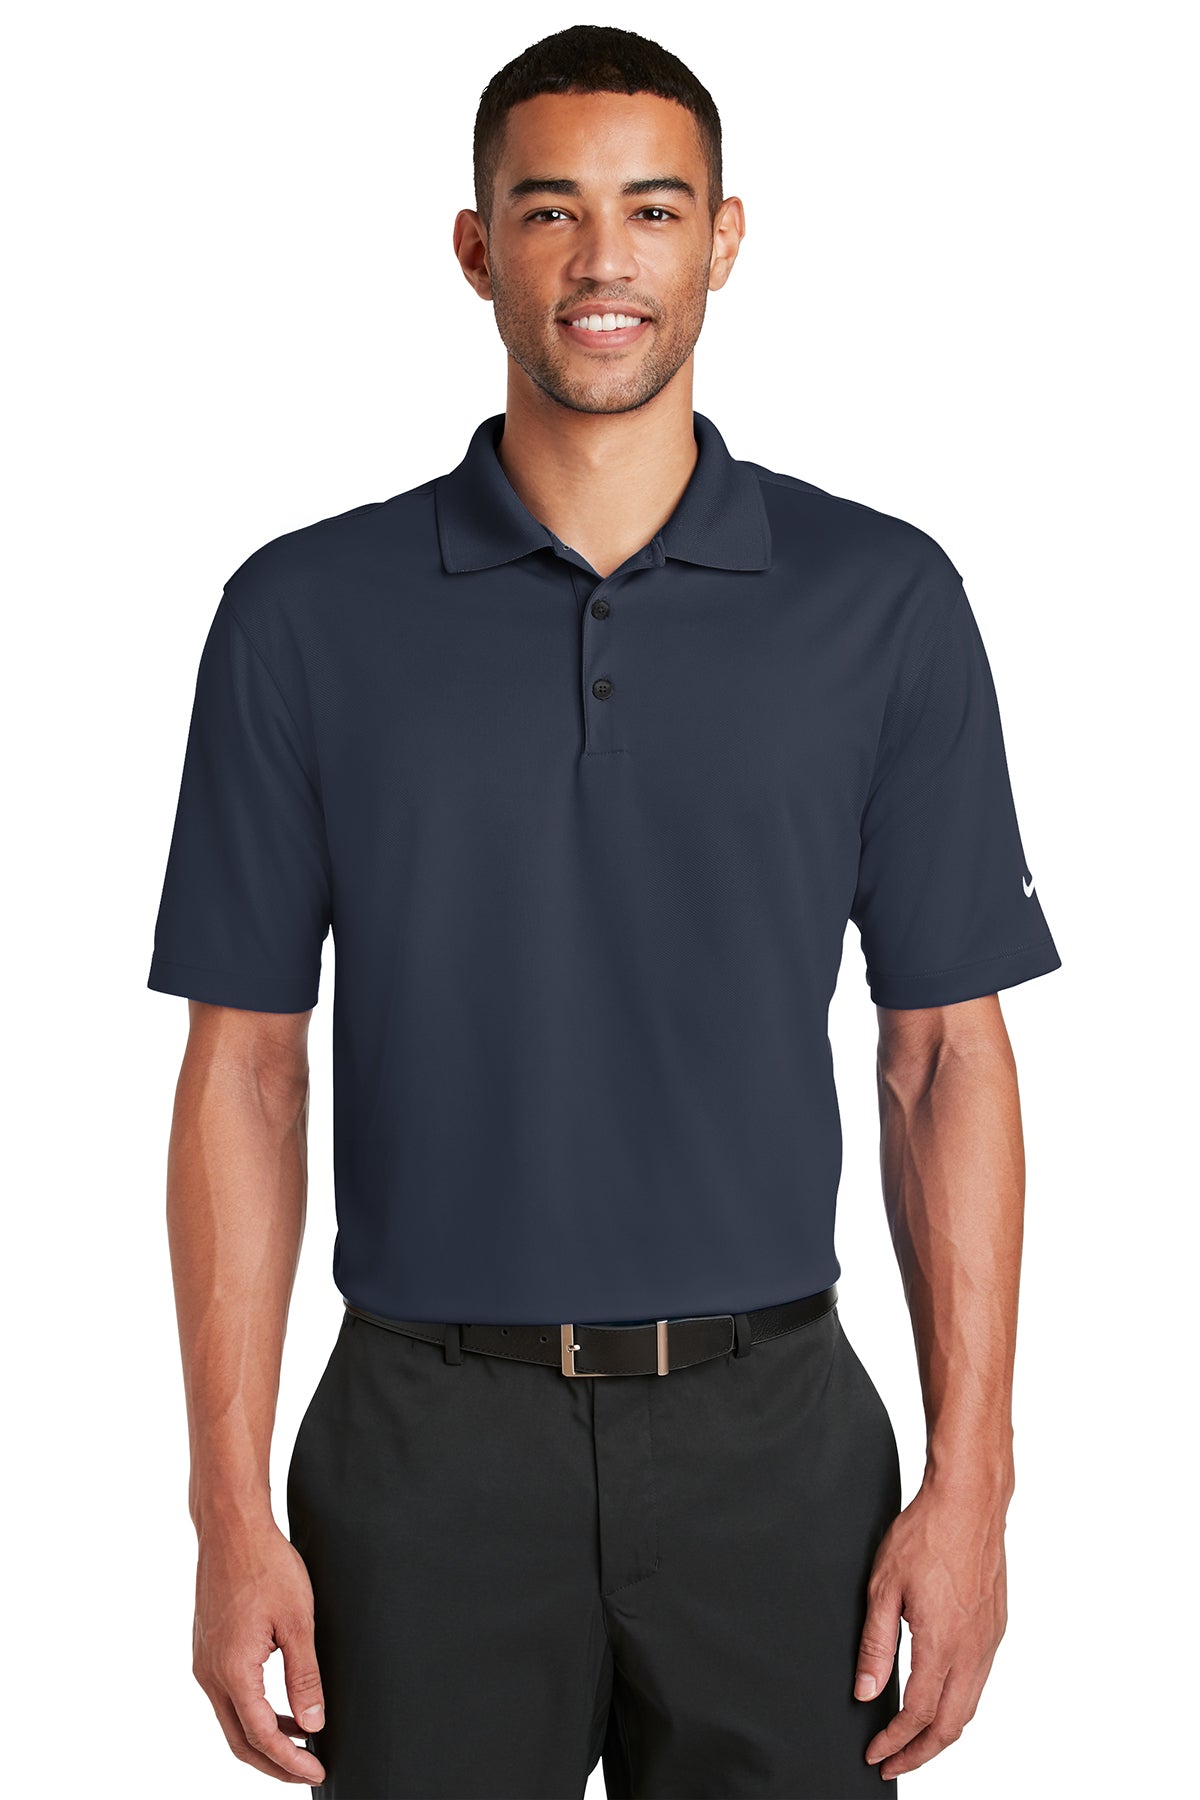 Vleien Premier Bevoorrecht LL Lake Image (Embroidered) Nike Dri-Fit Golf Polo – Forever 6ix Apparel